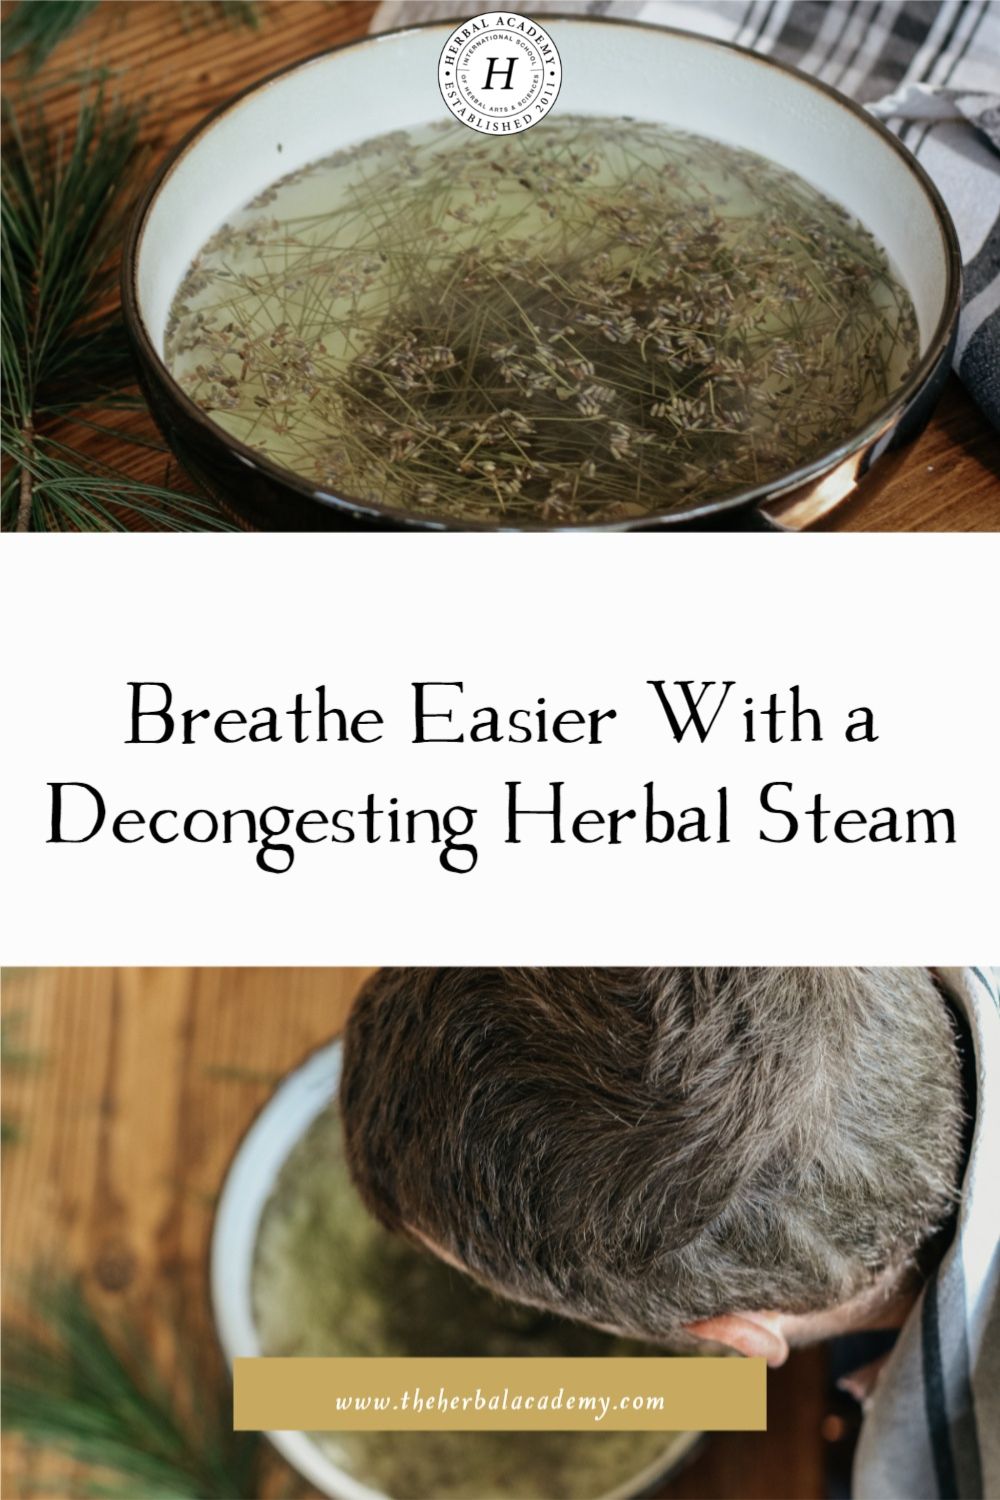 Breathe Easier With a Decongesting Herbal Steam | Herbal Academy | How to make a decongesting herbal steam! Choose the right natural decongestants to unclog your sinuses and help you breathe easier.